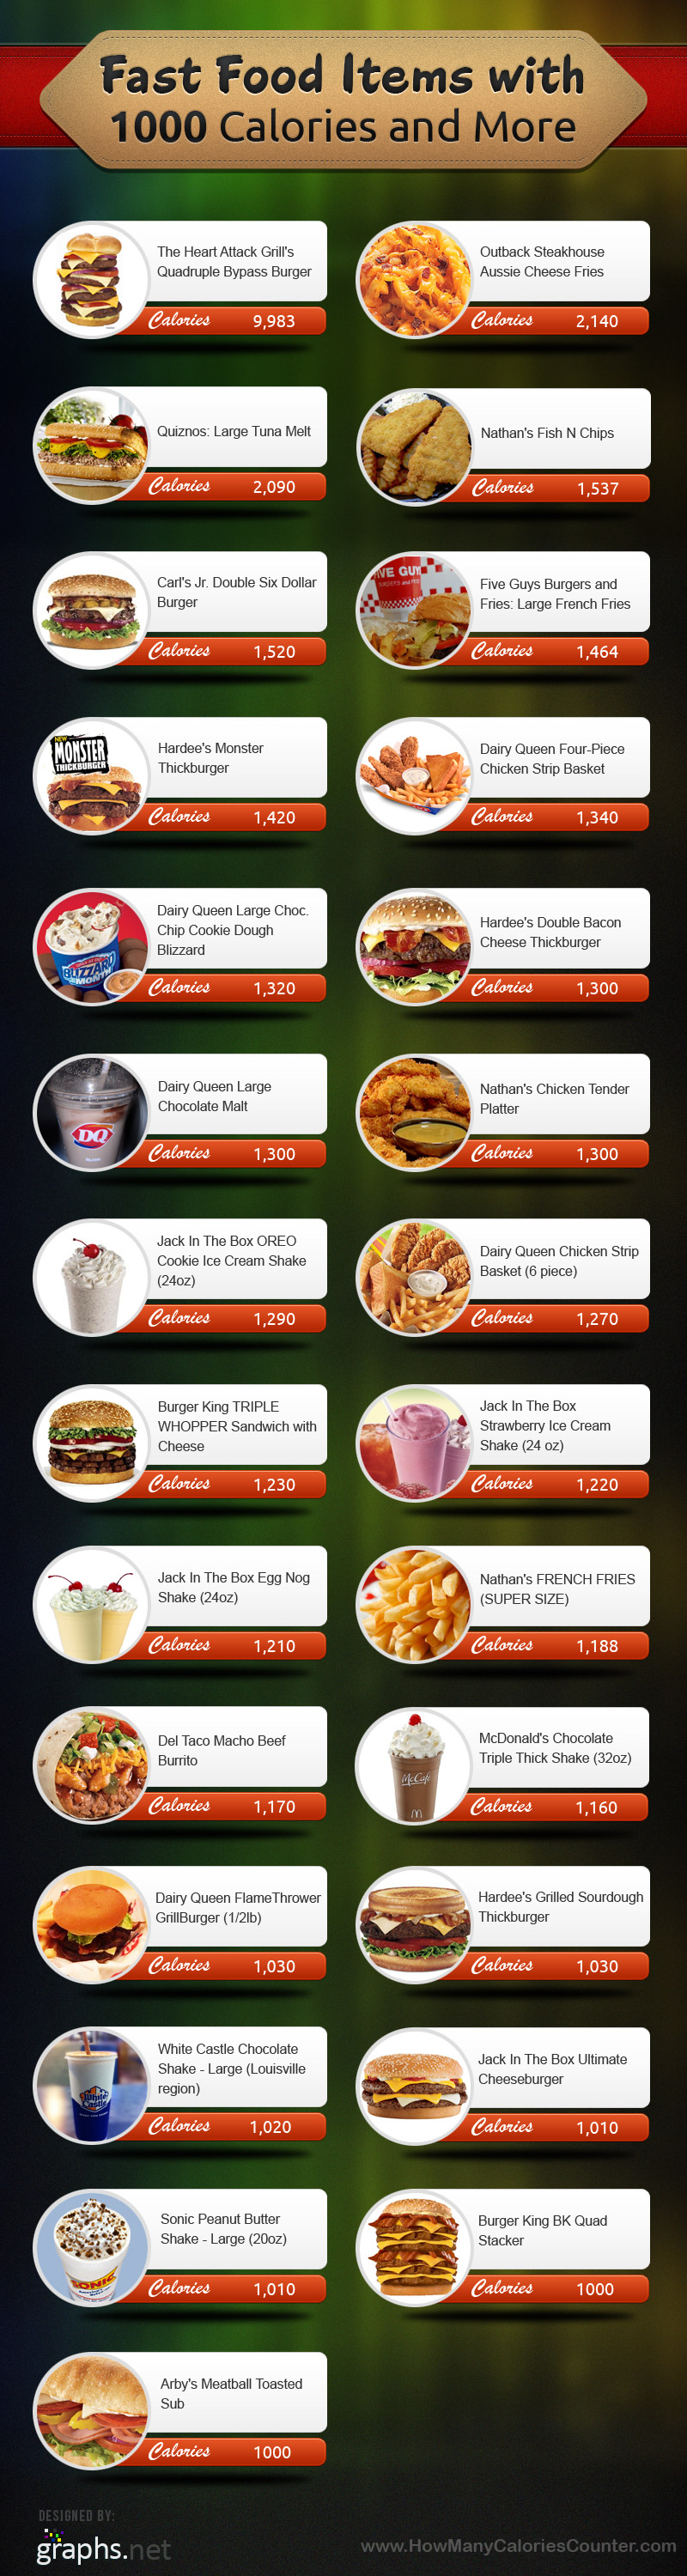 Fast Food Items with 1000 Calories and More